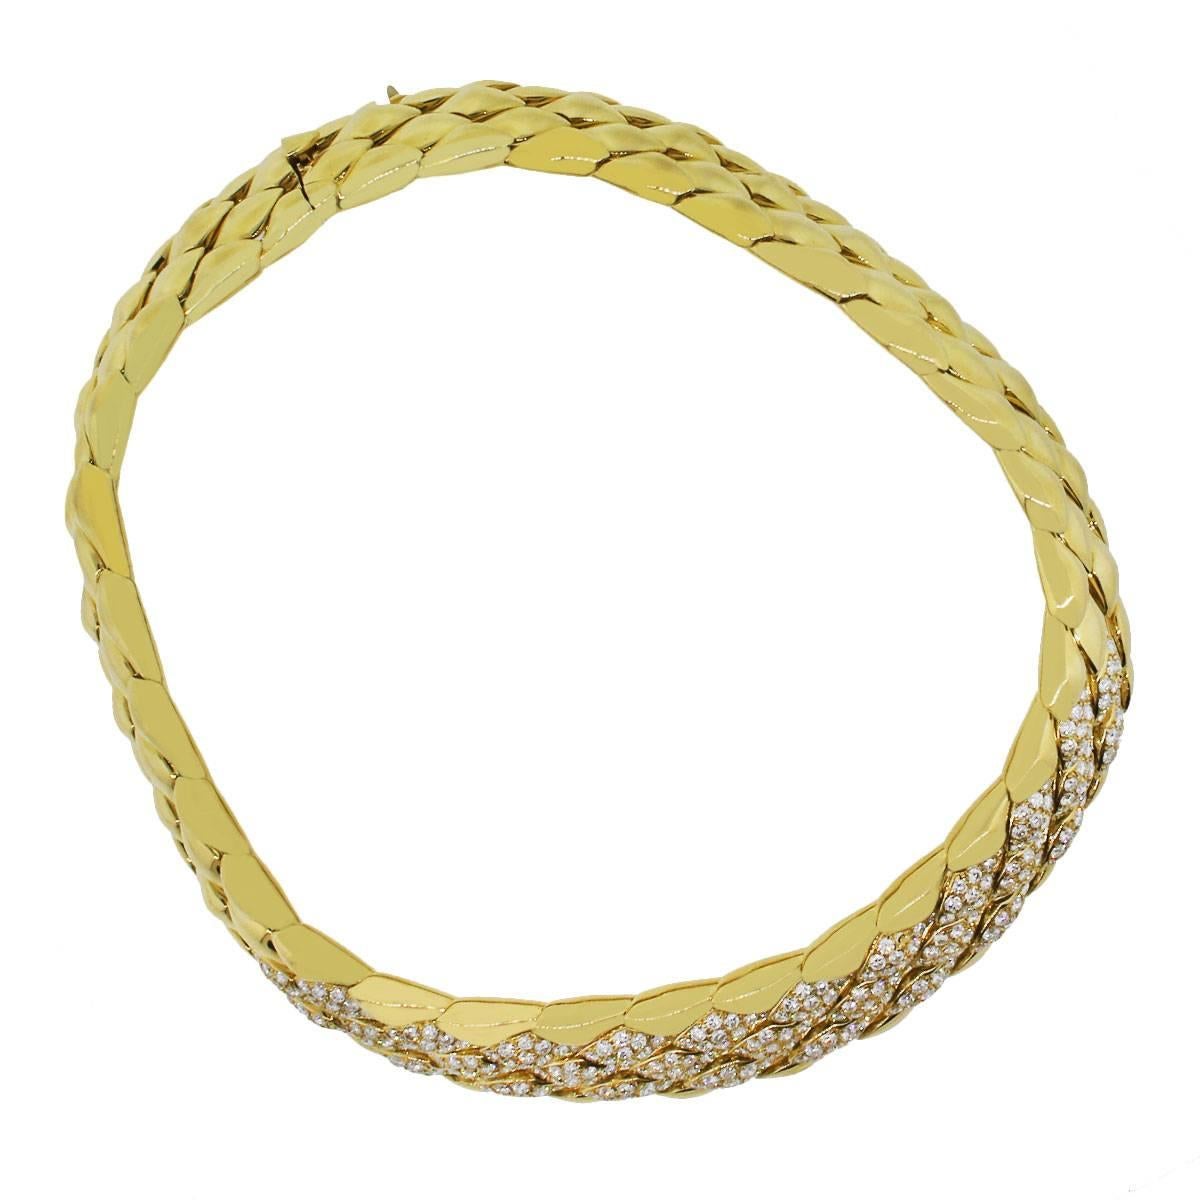 Material: 18k yellow gold
Diamond Details: Approximately 7.75ctw of round brilliant diamonds. Diamonds are G/H in color and VS in clarity
Necklace Measurements: Necklace is 15″ in length.
Total Weight: 210.1g (135.1dwt)
SKU: A30311369